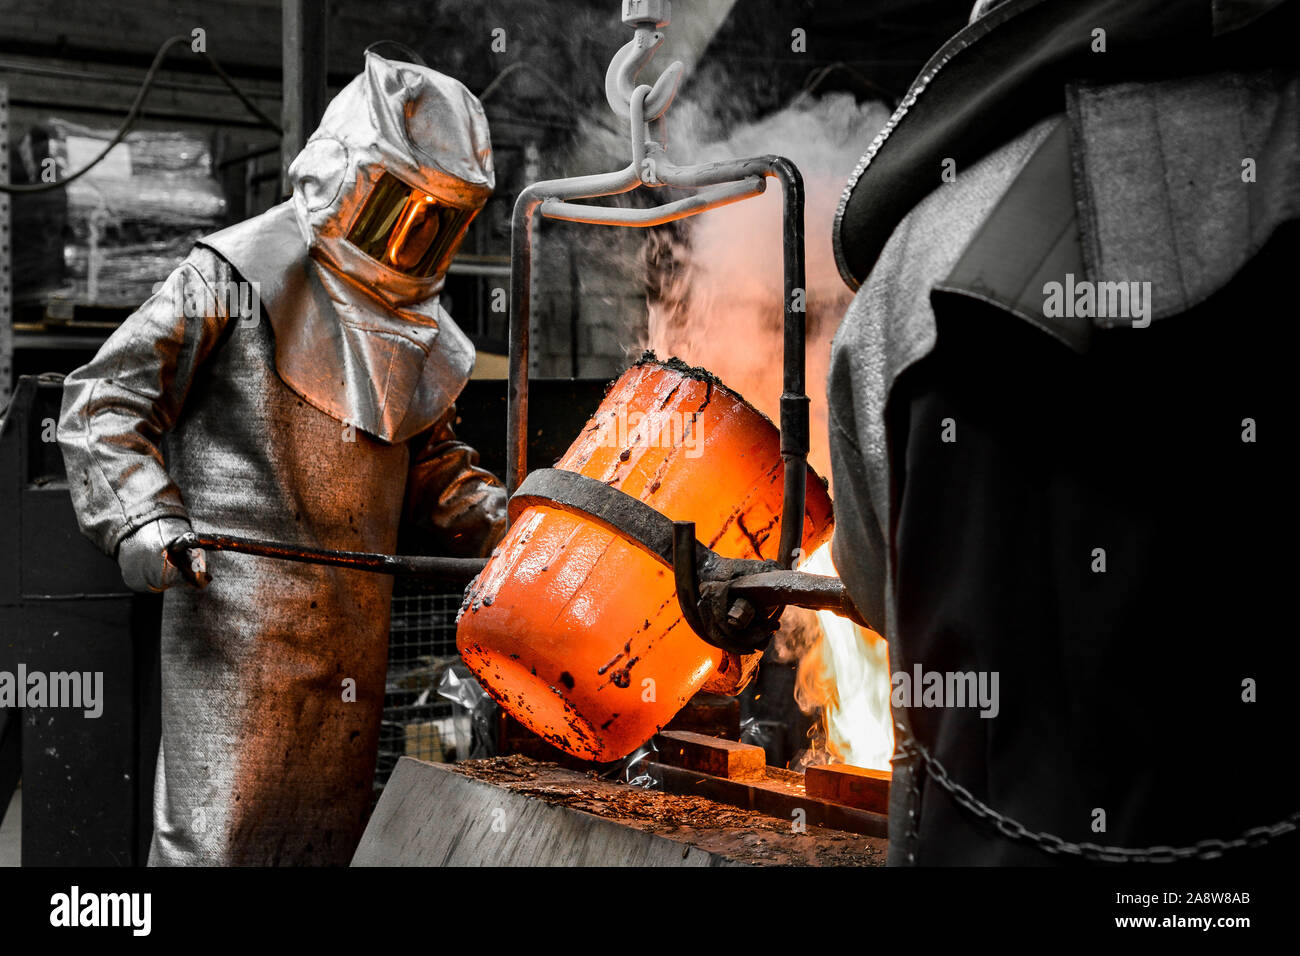 In a foundry workshop. A worker protected by a safety suit pours the molten metal into a mold Stock Photo